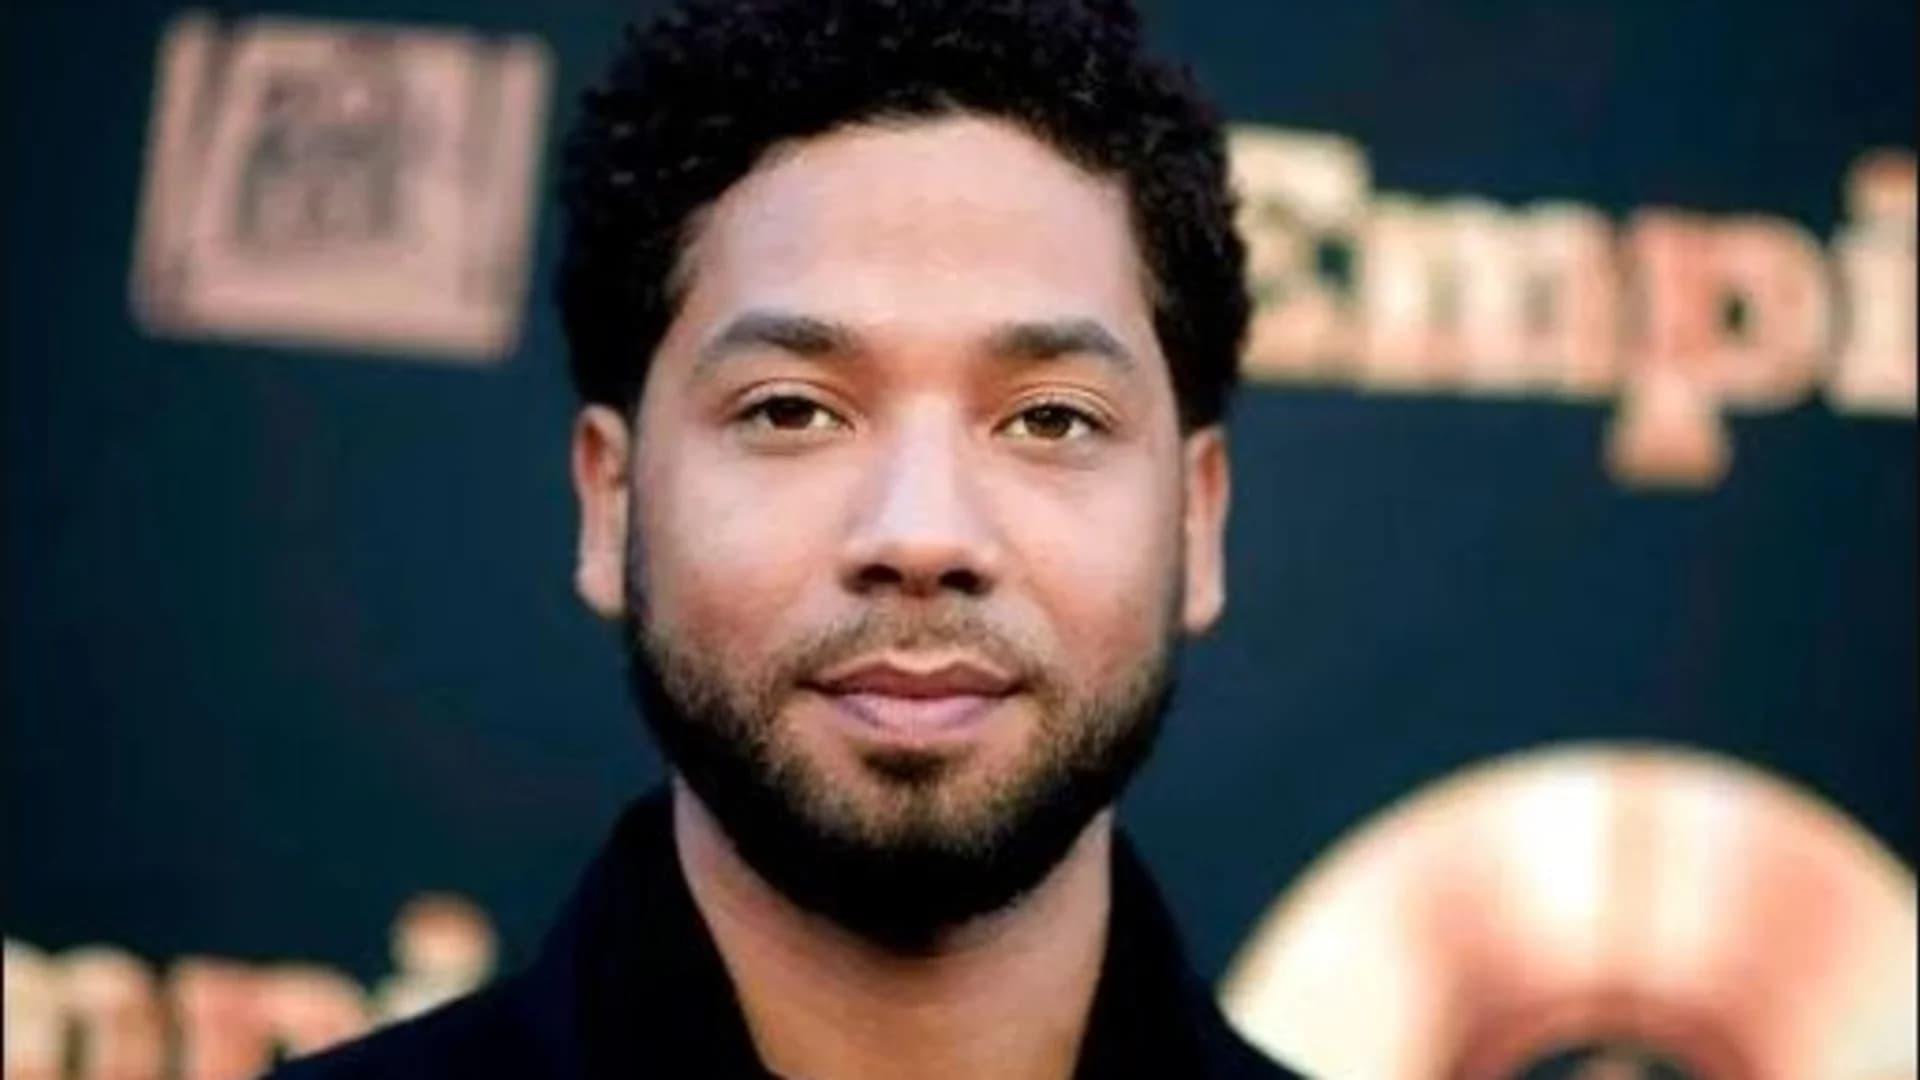 Jussie Smollett indicted on 16 counts stemming from reported attack